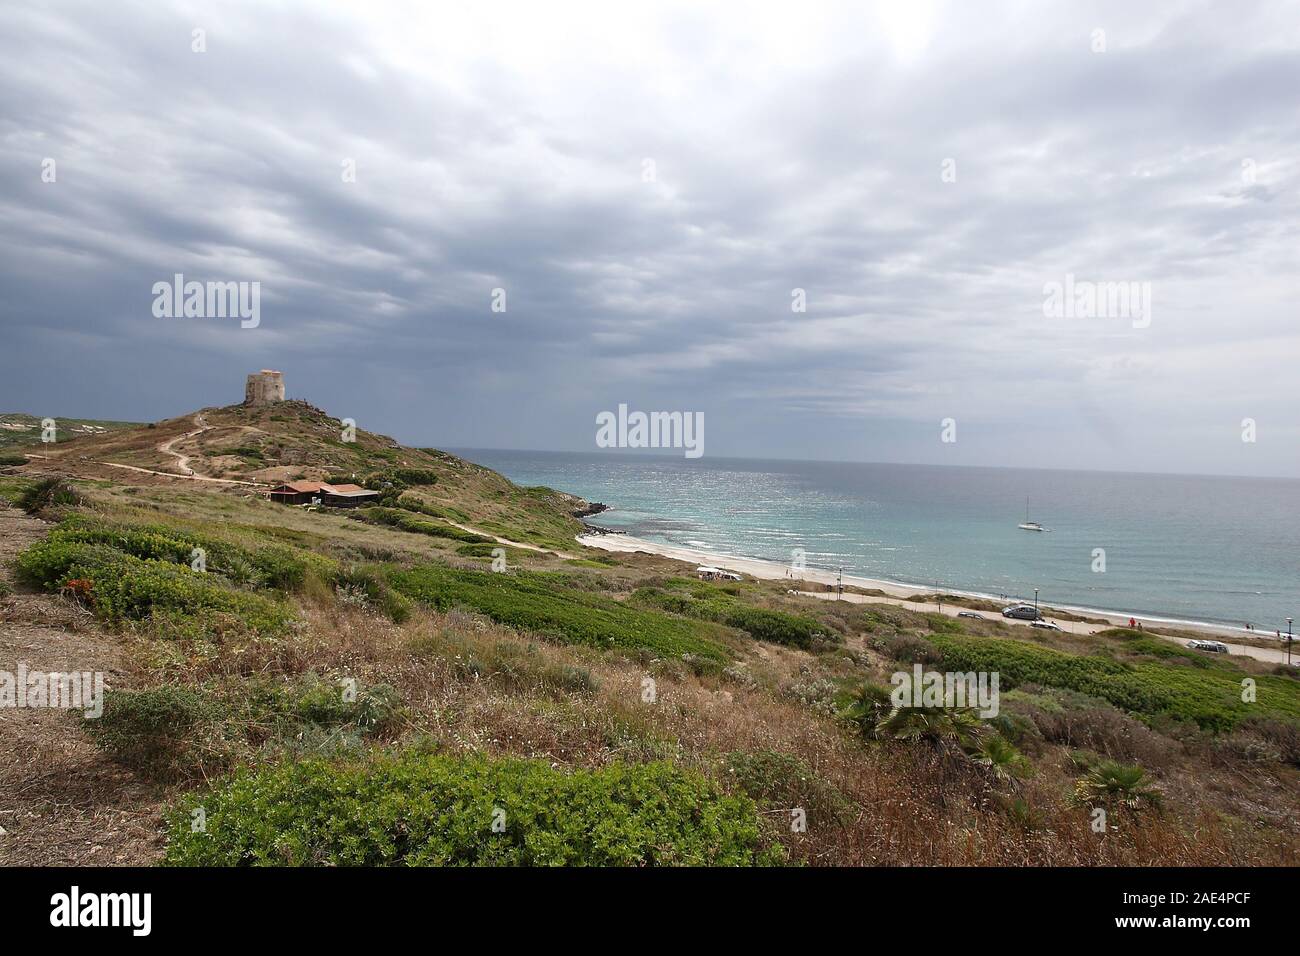 Cabras, Italy - 4 July 2011: the archaeological site of Tharros in the province of Oristano Stock Photo